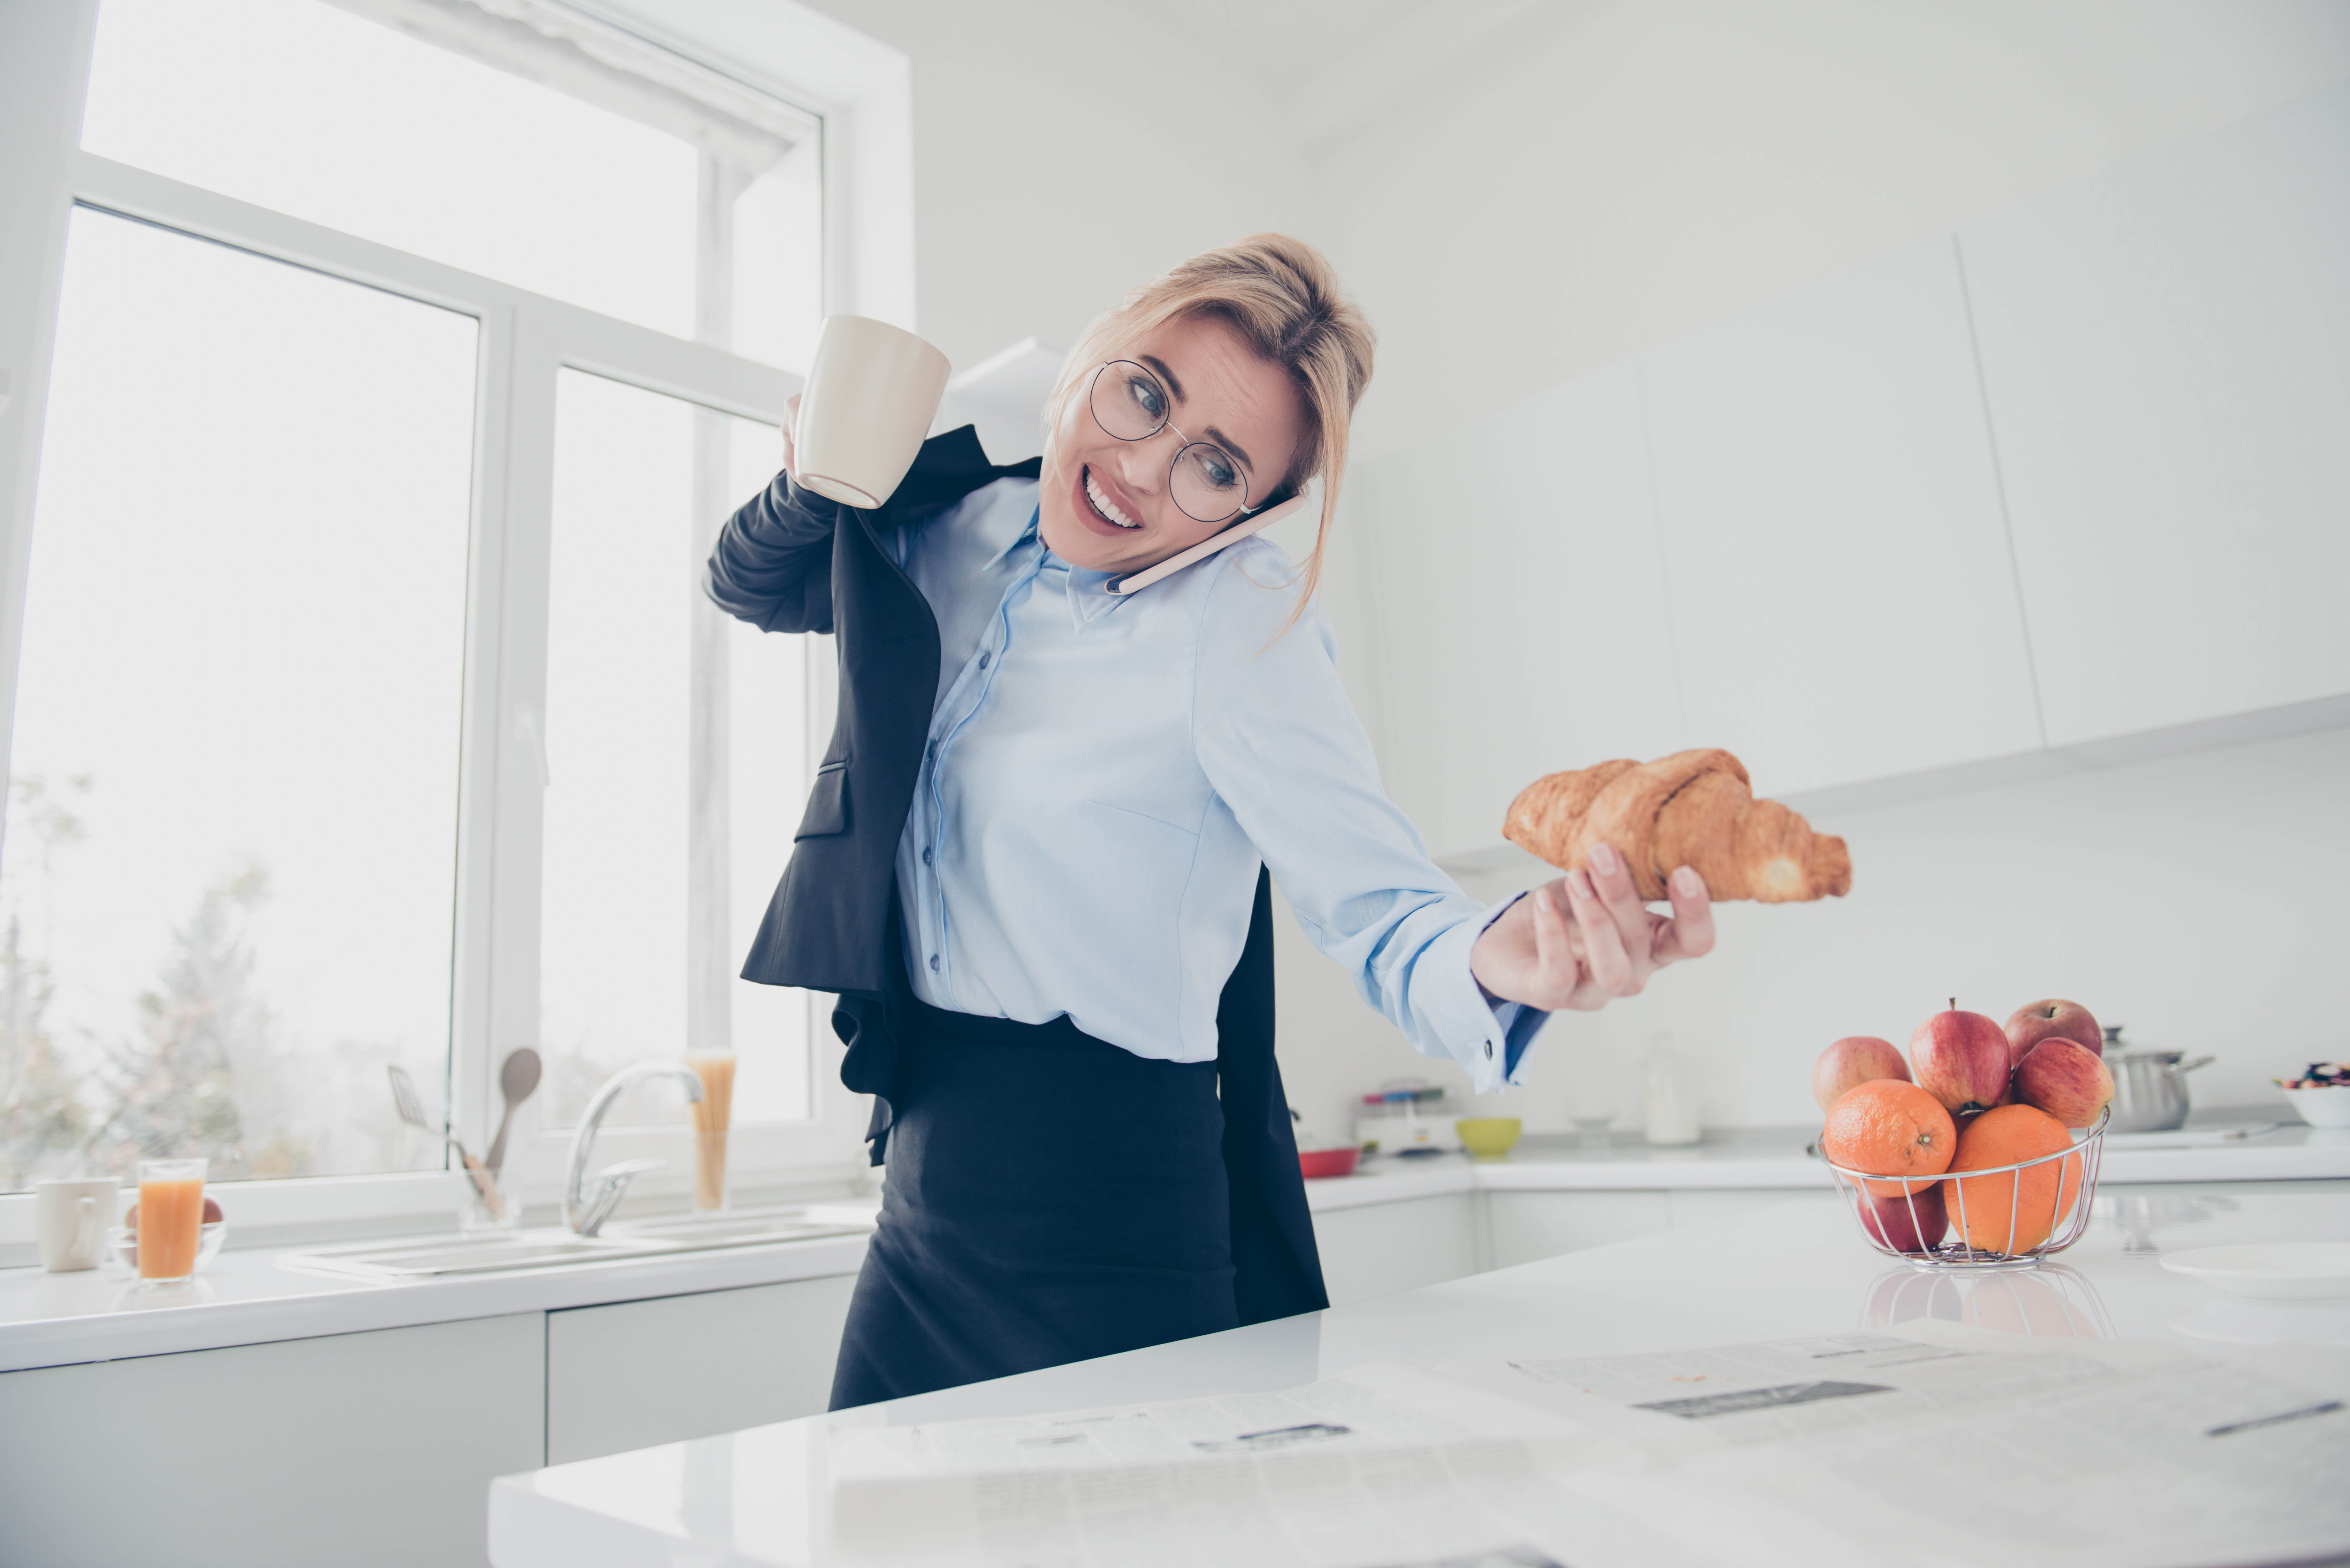 Blonde woman rushing in the morning, putting on her blazer while reaching for a croissant on the kitchen counter. She's holding a coffee cup in her top hand, that arm has her blazer already on.